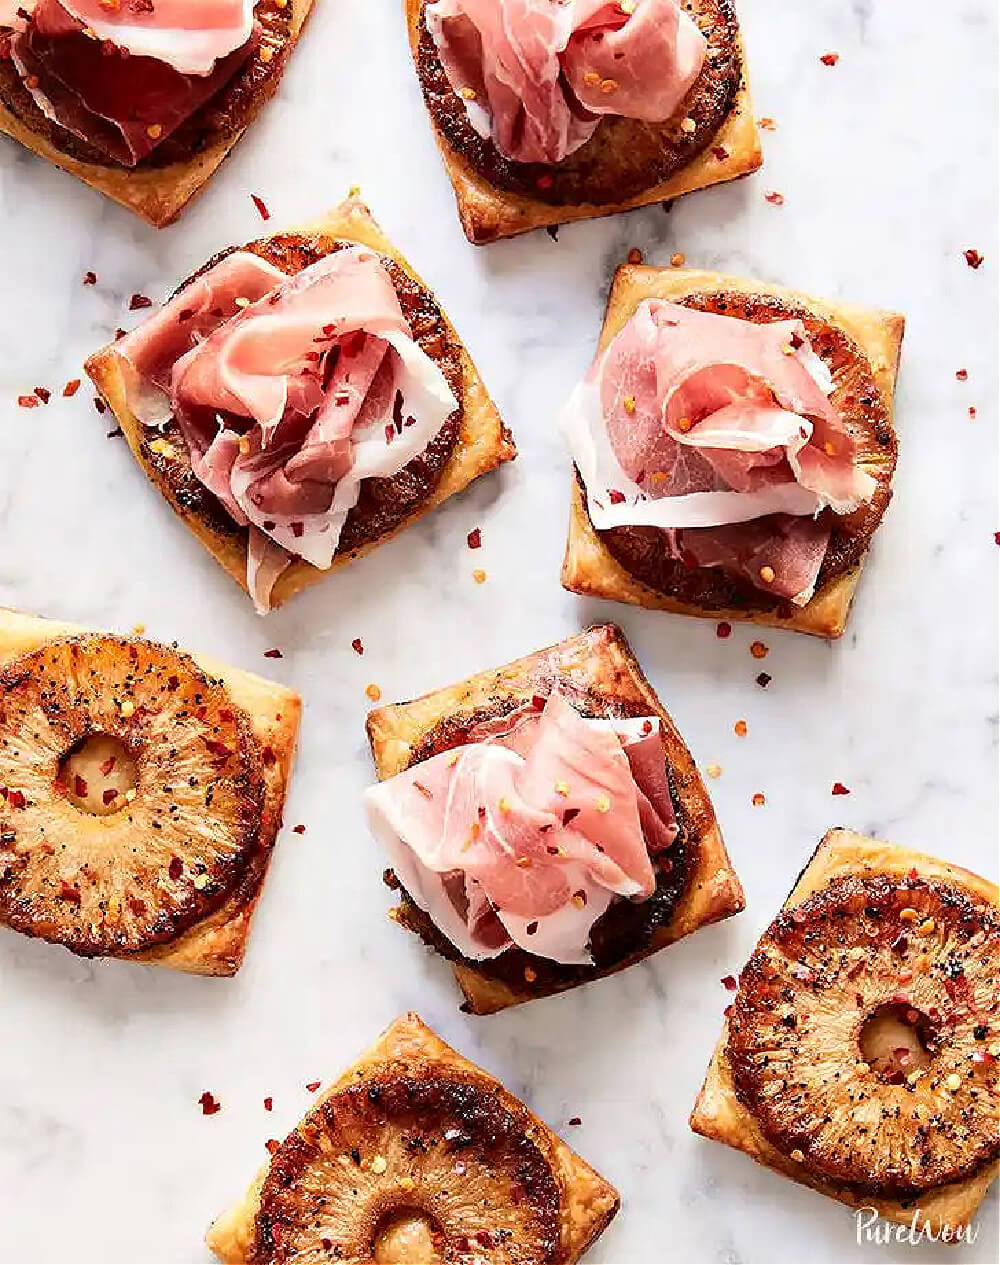 In 10 Delightful New Year's Eve Appetizer Recipes, this is Spicy pineapple prosciutto tarts